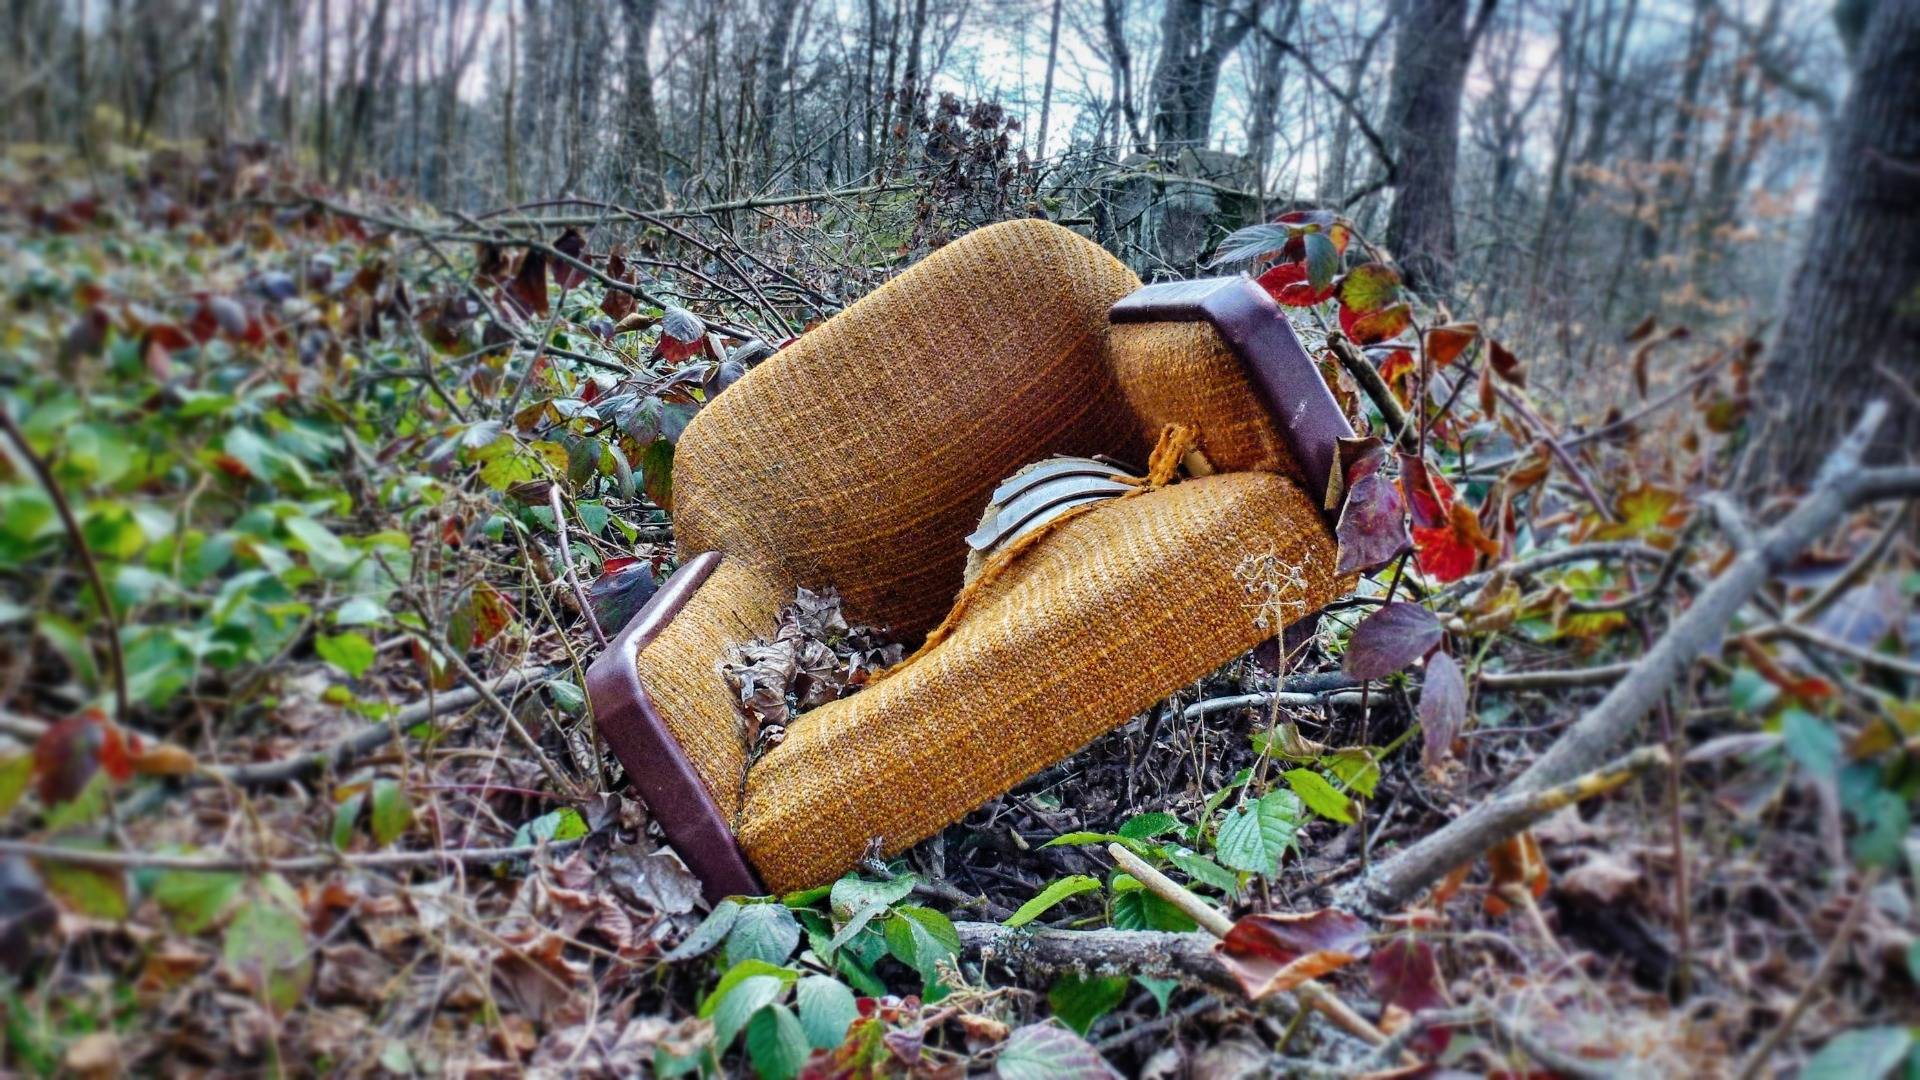 This old armchair rests in the wood